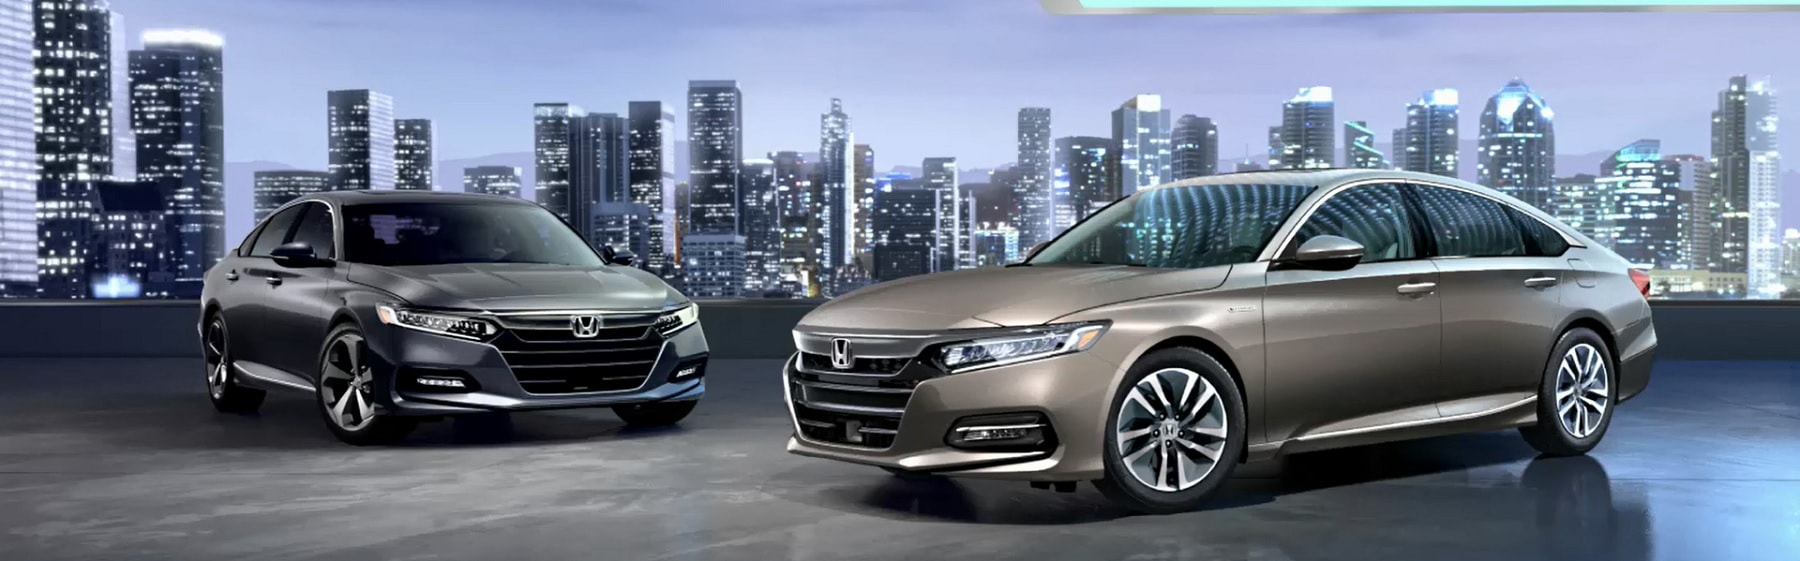 Power Performance And Capability Of The Honda Accord